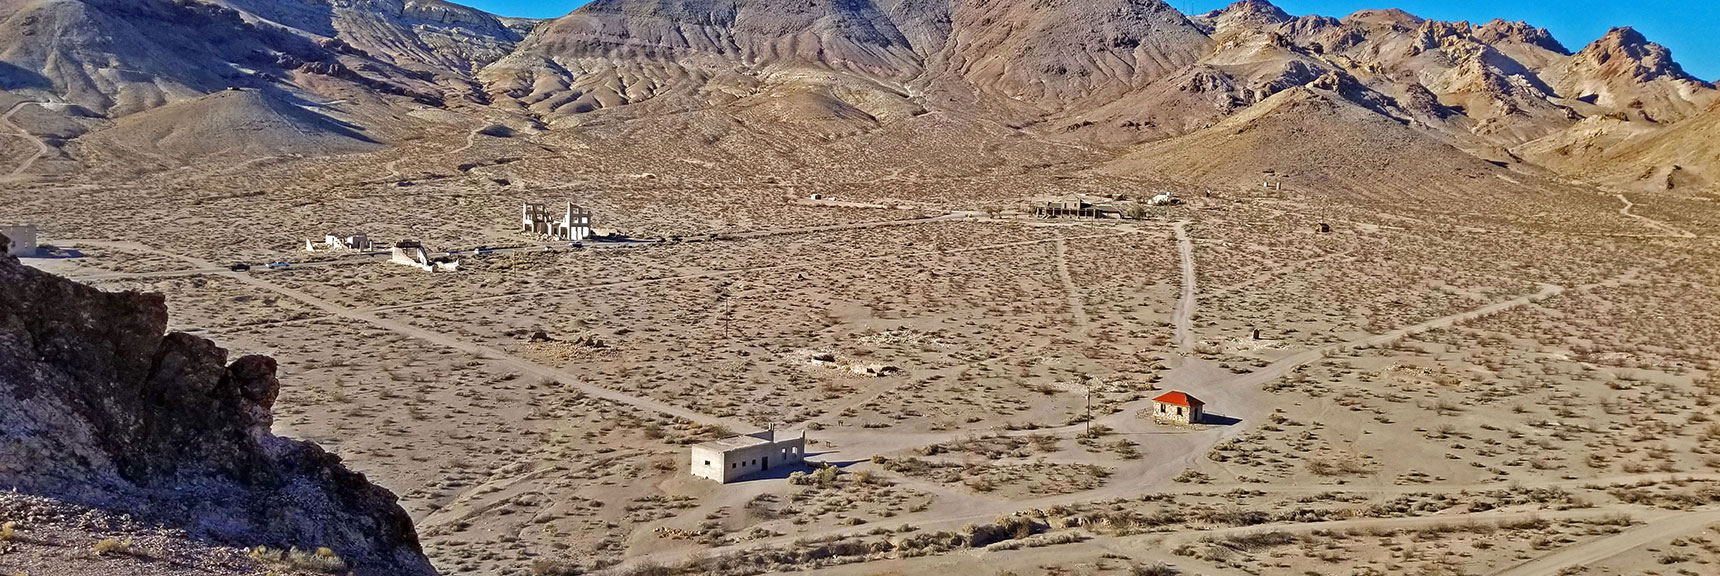 Rhyolite Ghost Town | Death Valley National Park, California